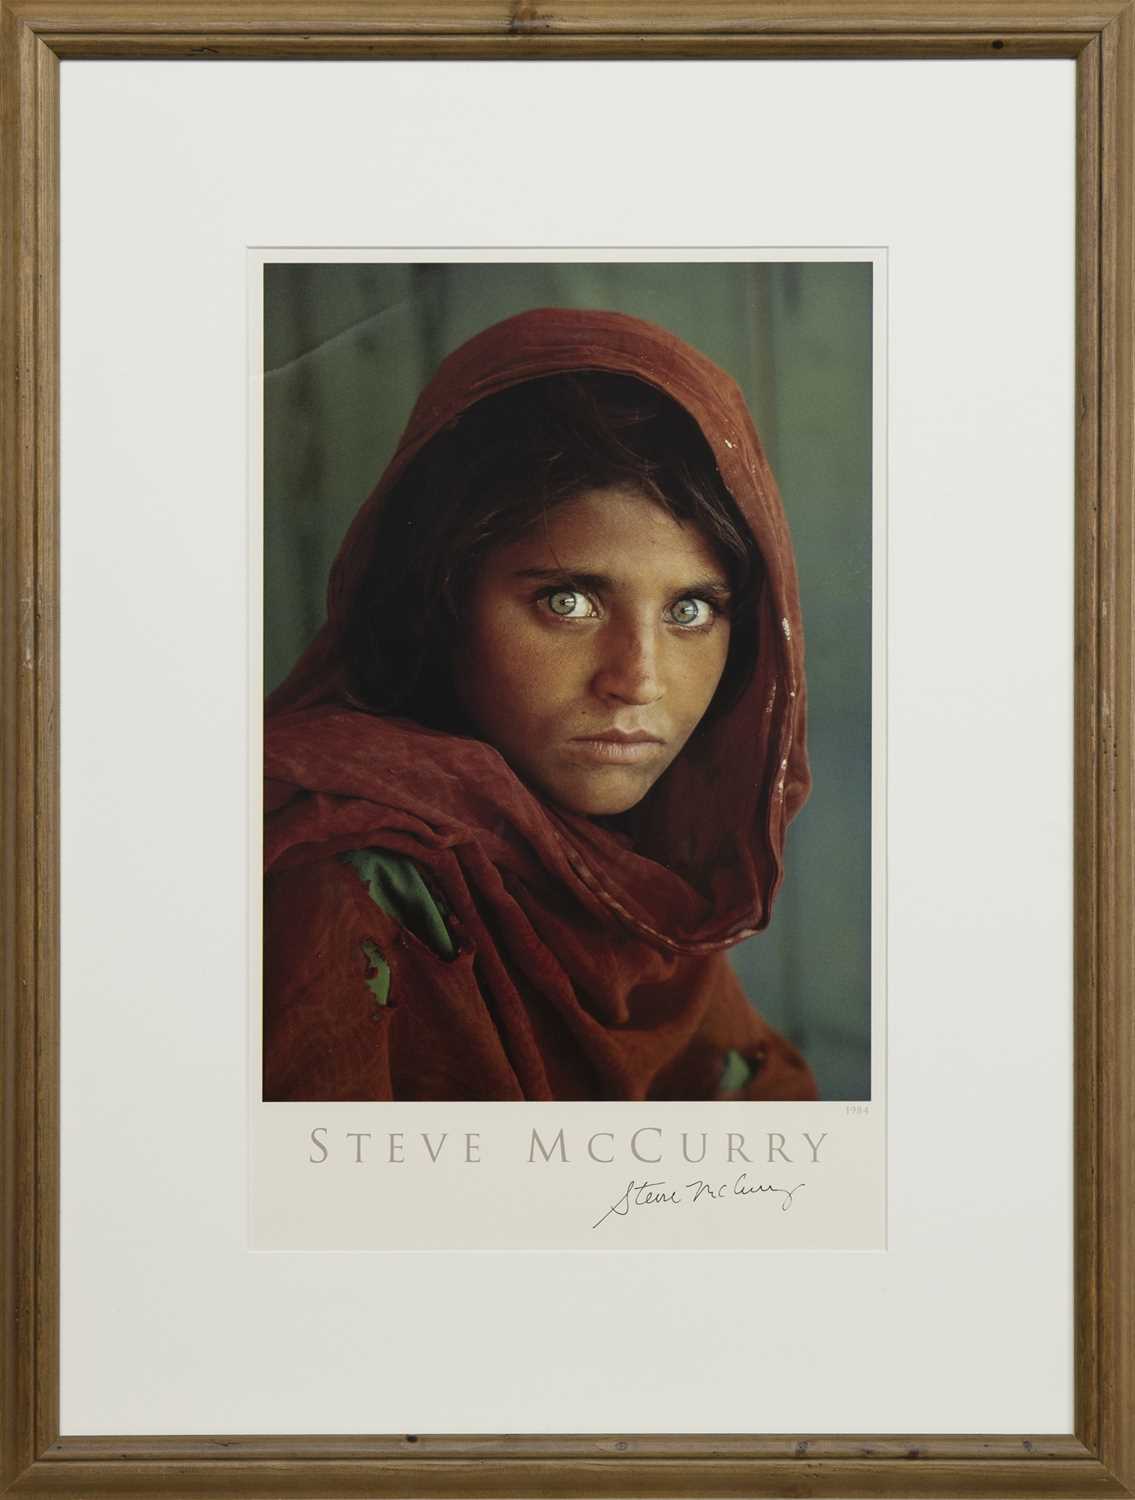 SHARBAT GULA, AFGHAN GIRL, PAKISTAN, A SIGNED LITHOGRAPH BY STEVE MCCURRY